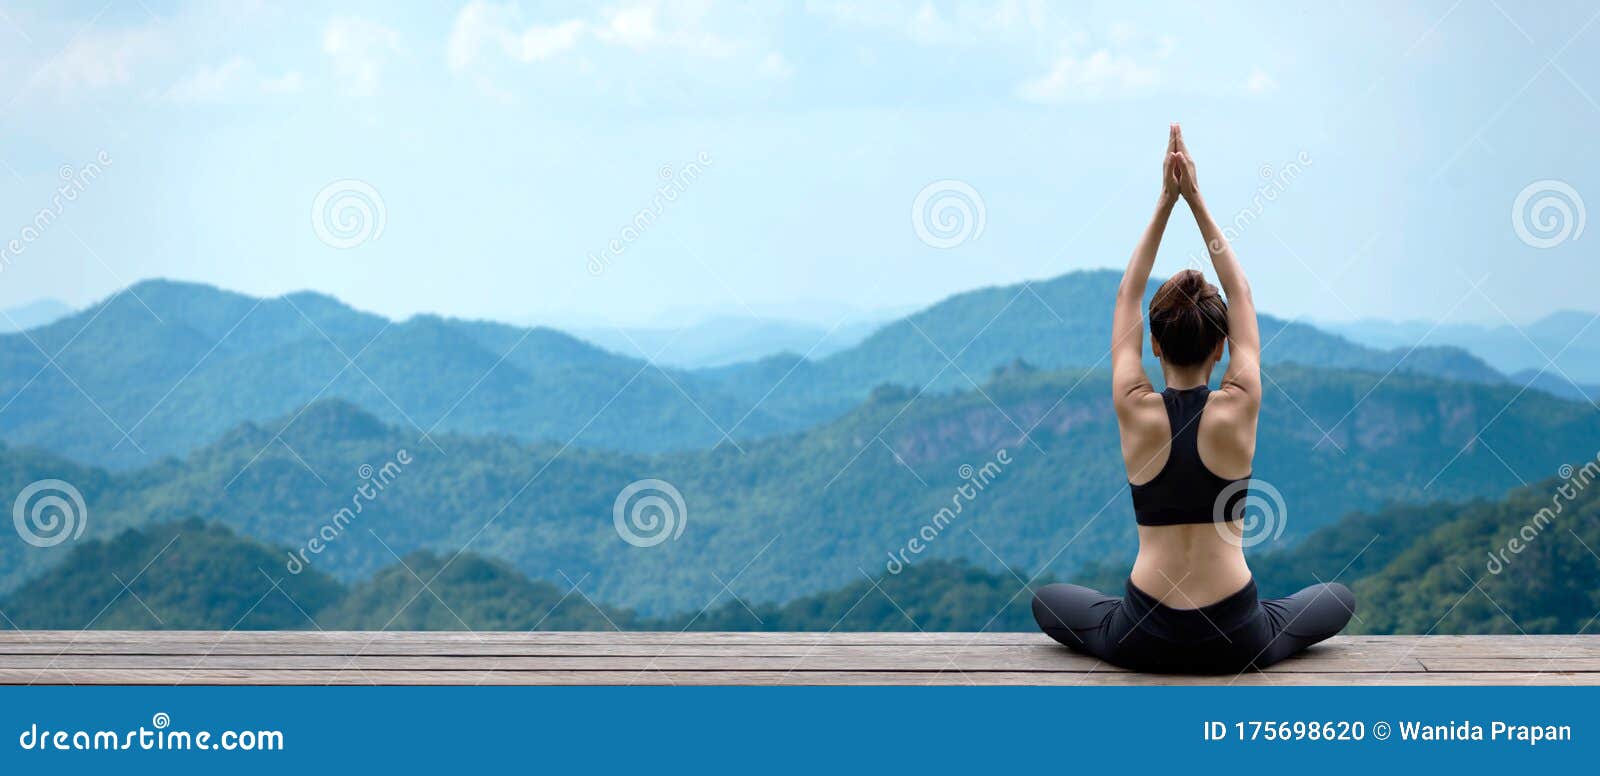 lifestyle woman yoga exercise and pose for healthy life. young girl or people pose balance body vital zen and meditation for worko